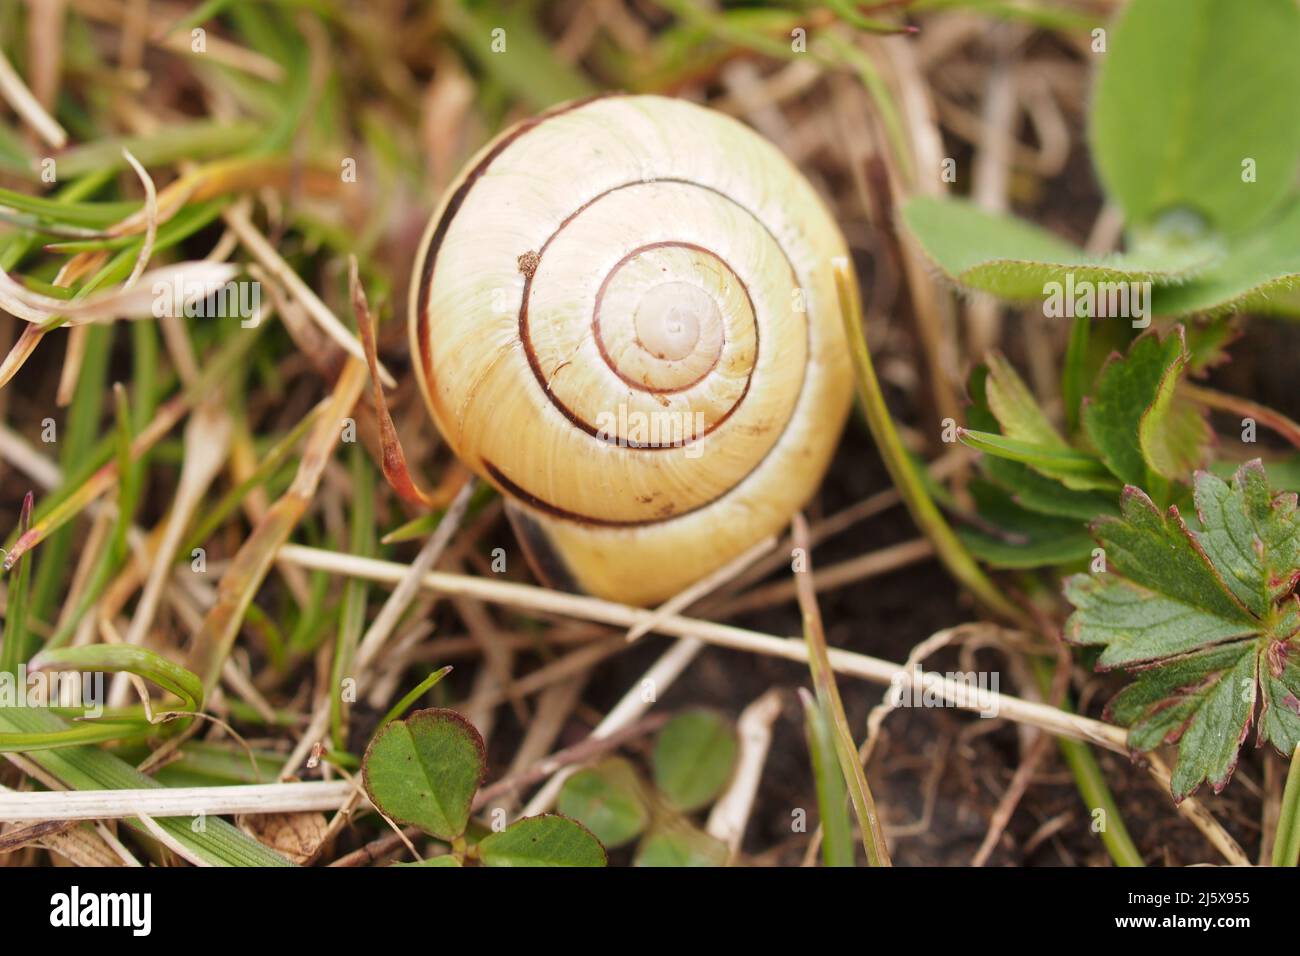 A close up of a land snails epty shell, Cepaea nemoralis, laying on grass in wetlands Stock Photo